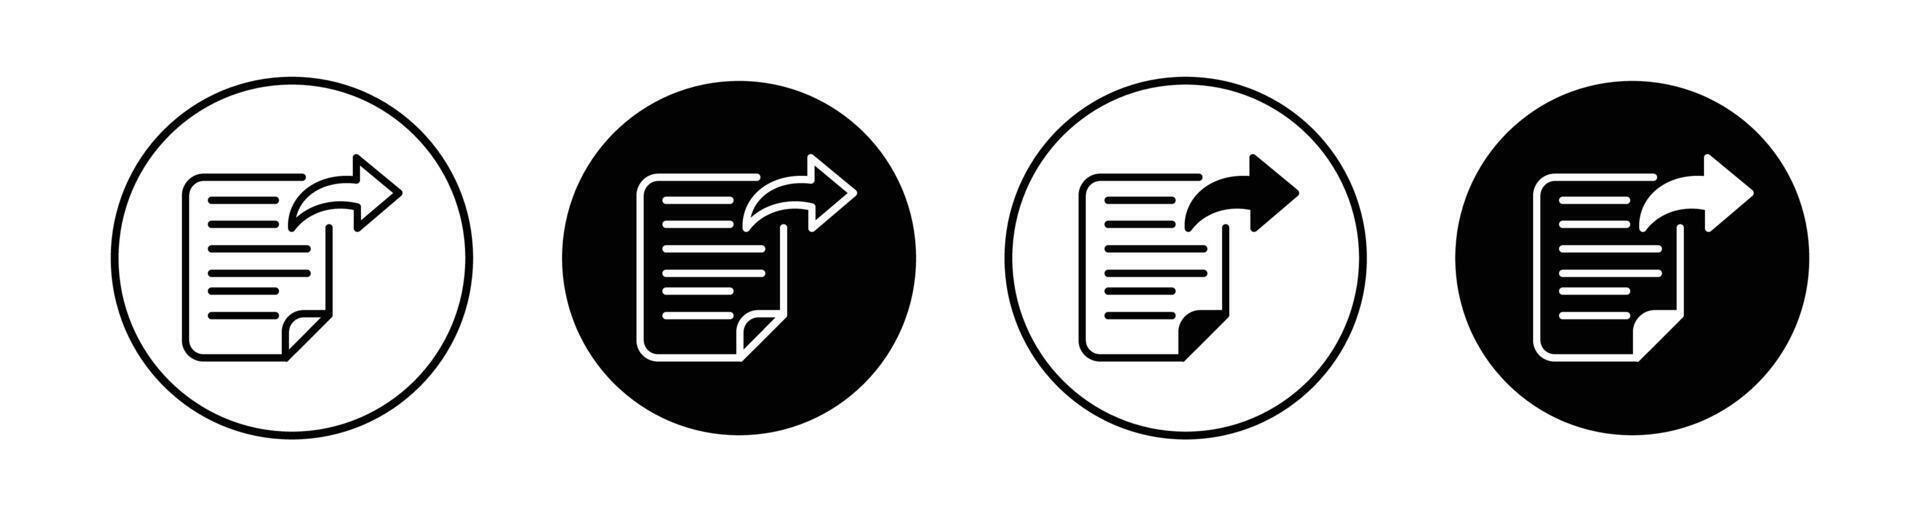 Document share icon vector